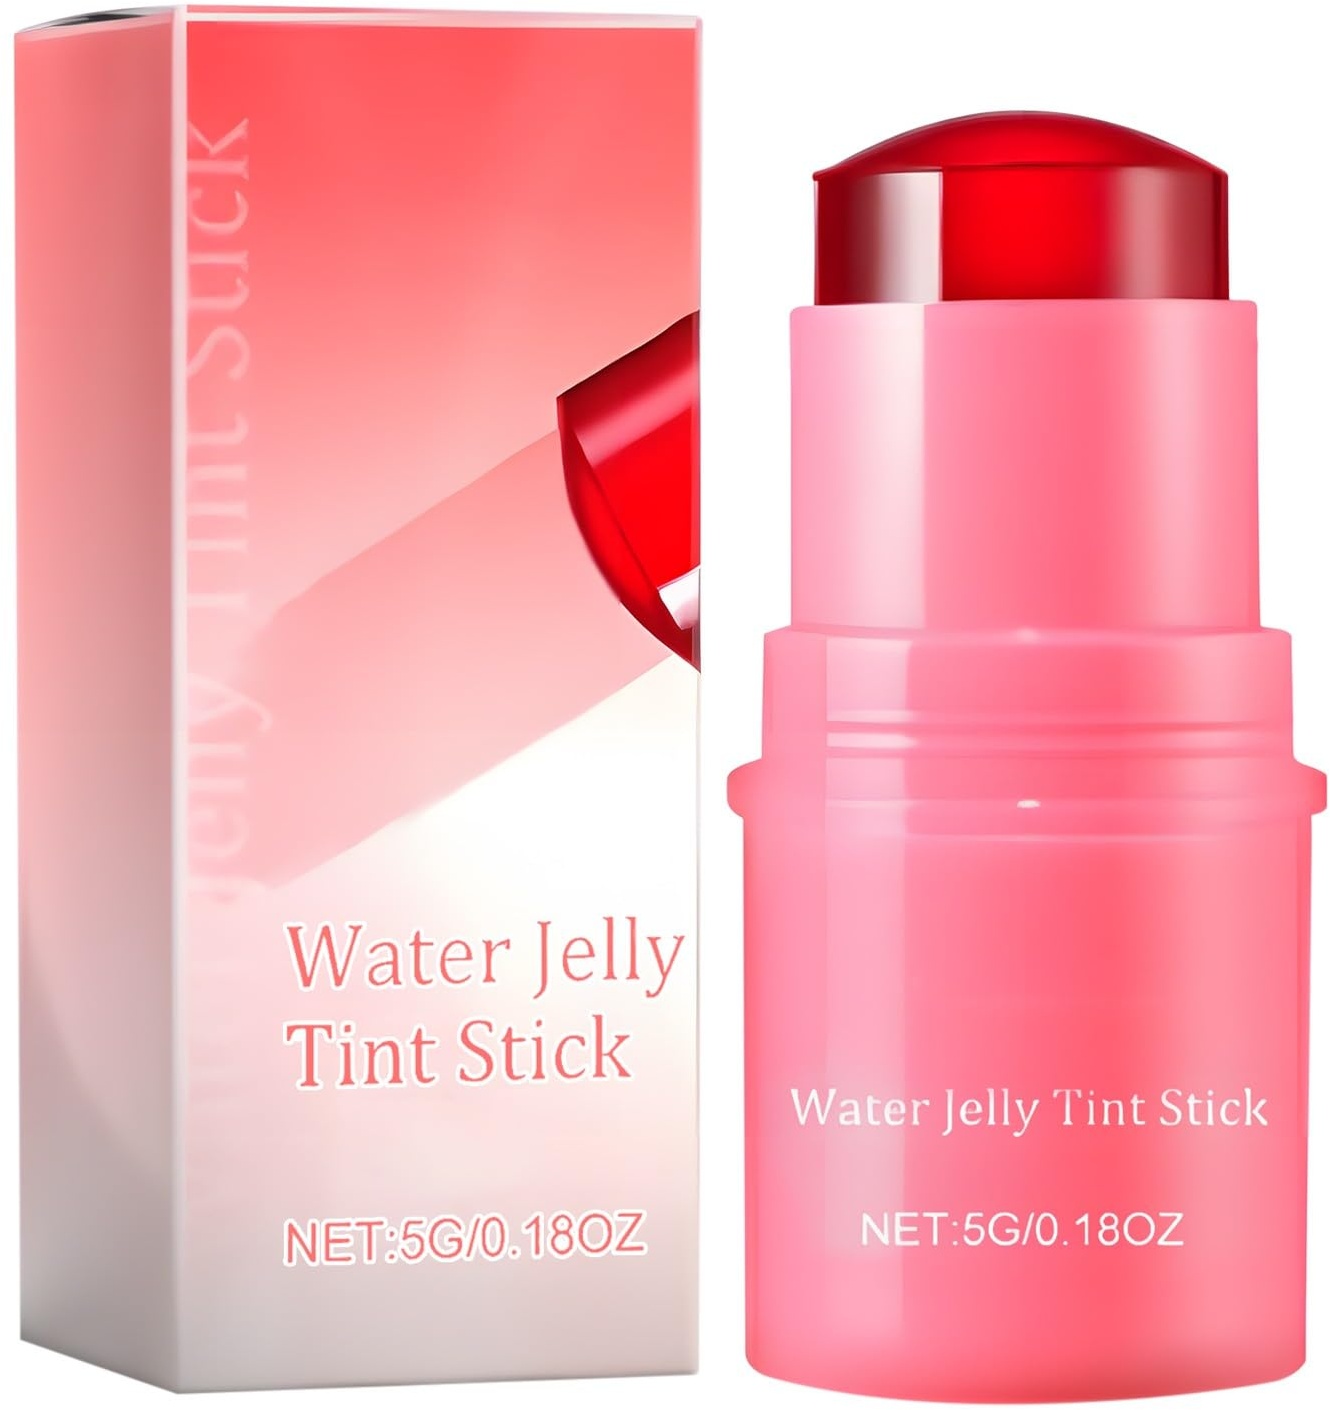 Blush and Lip Tint Stick, Water Jelly Stick Tint, 2-in-1 Cheek and Lip Tint, Cheek and Lip Stain, Makeup Blush Stick, Makeup for Cheek & Lips & Eyes, Suitable for All Skin Types (D)